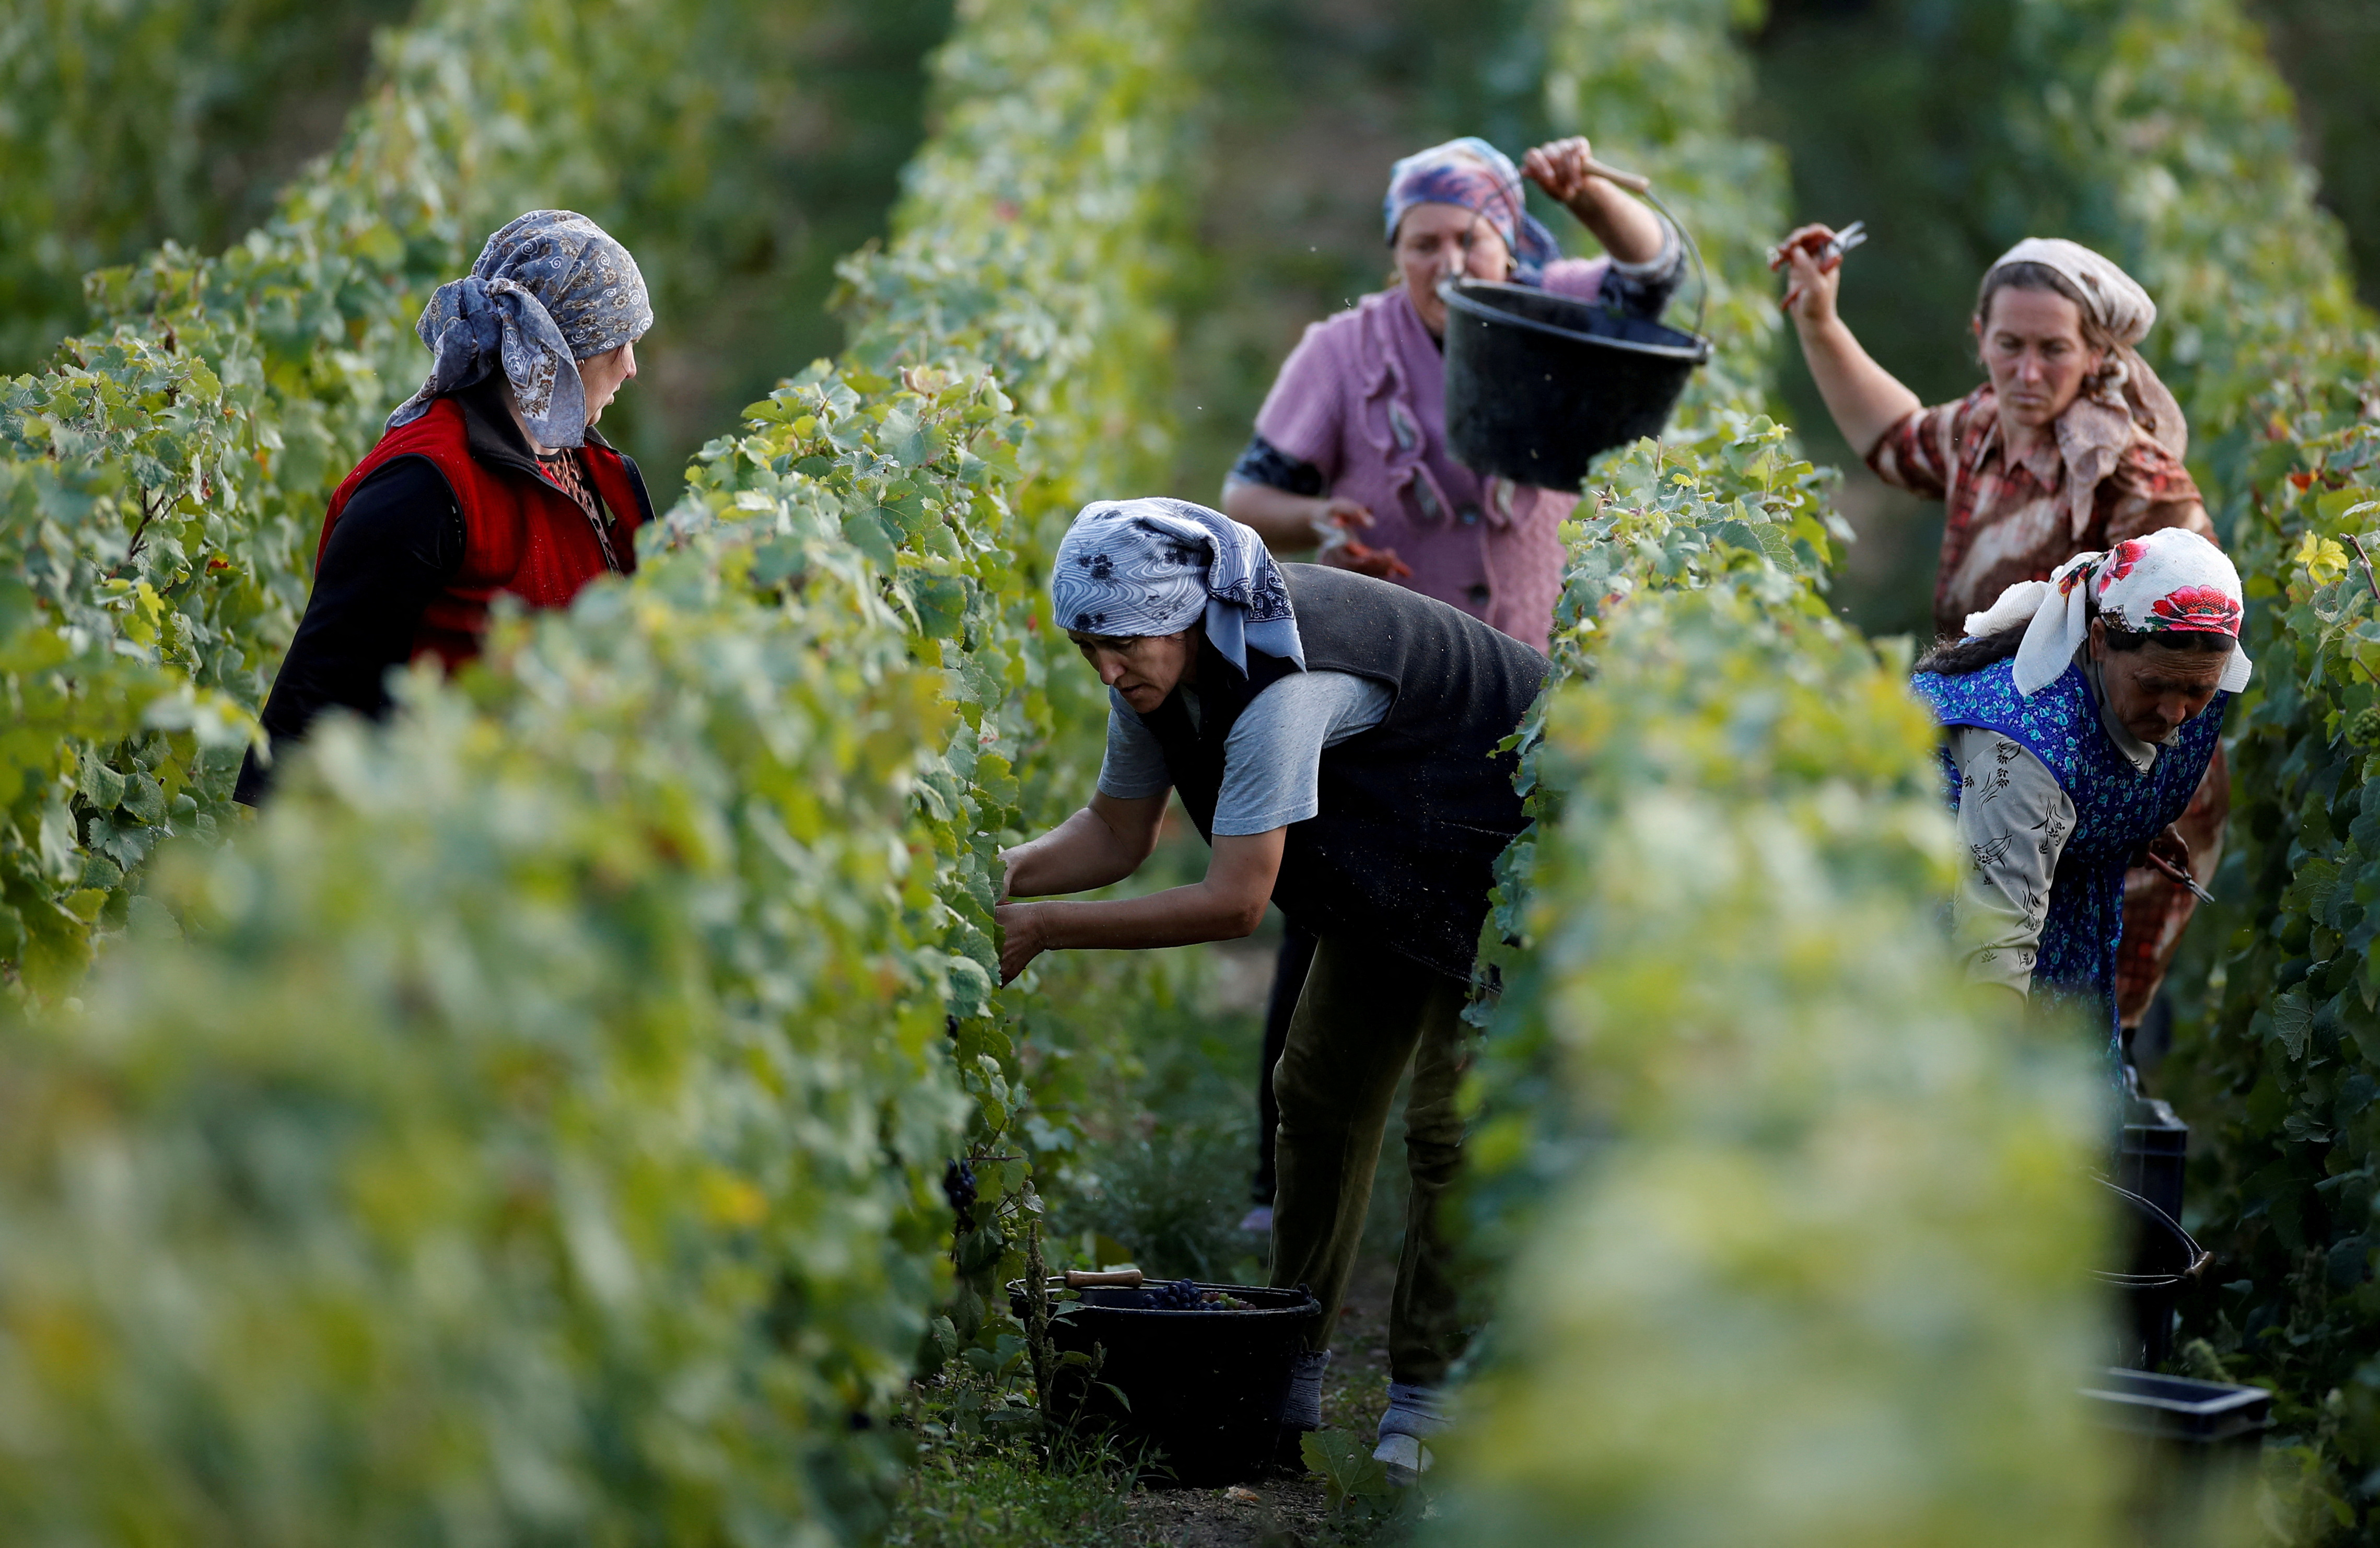 Workers collect grapes in a Taittinger vineyard during the traditional Champagne wine harvest in Pierry